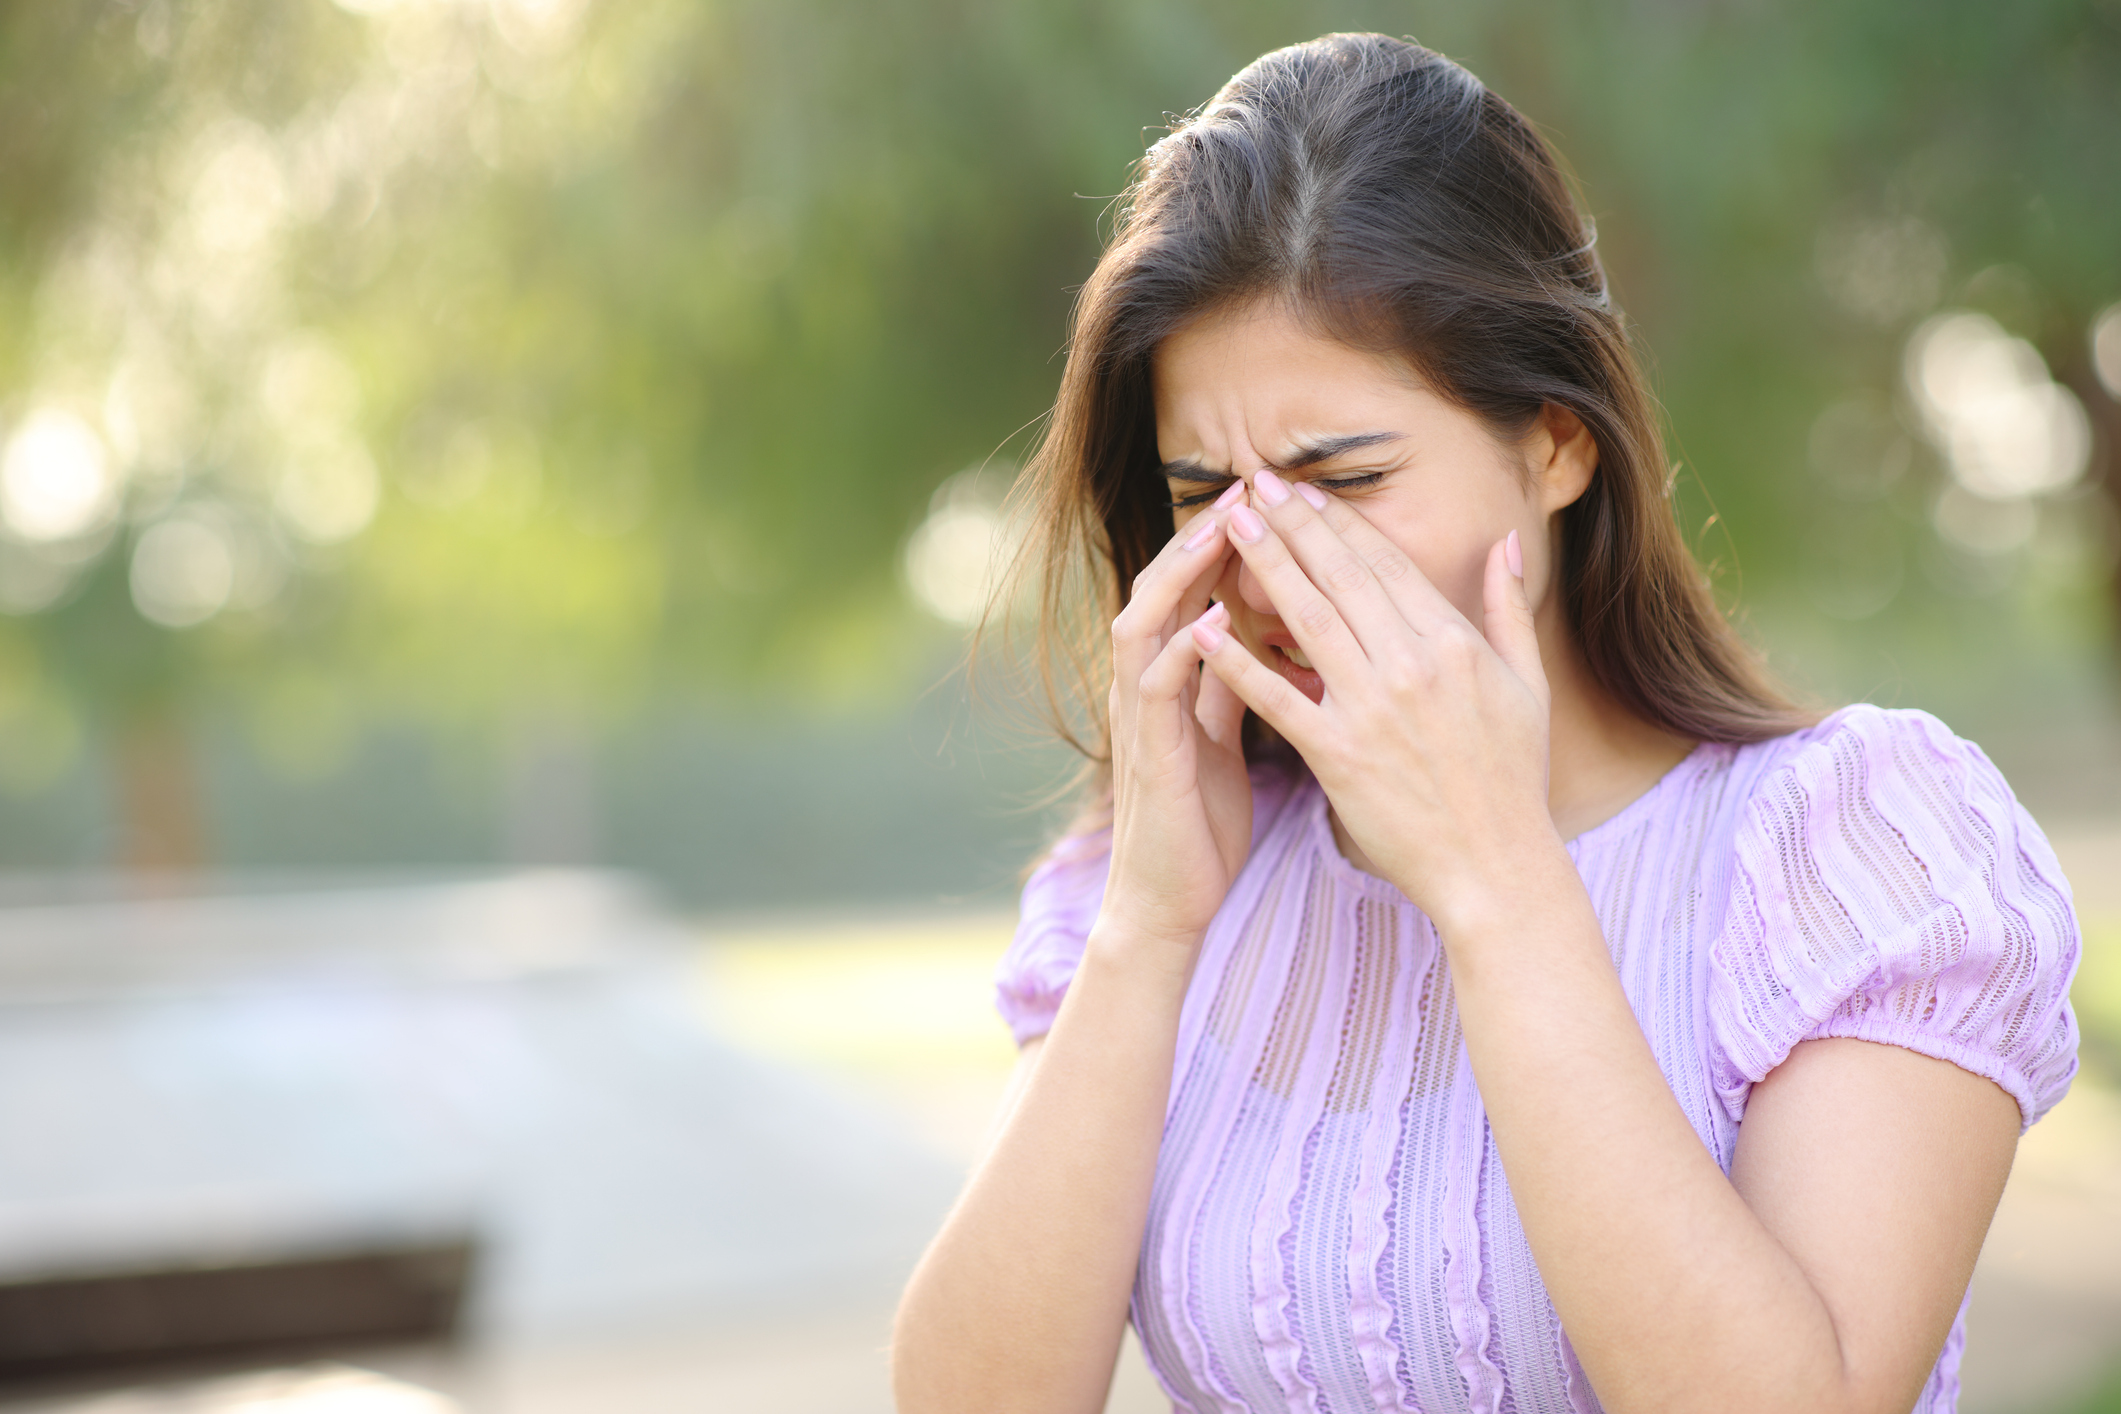 Allergic woman scratching eyes in a park, itchy eyes due to allergies